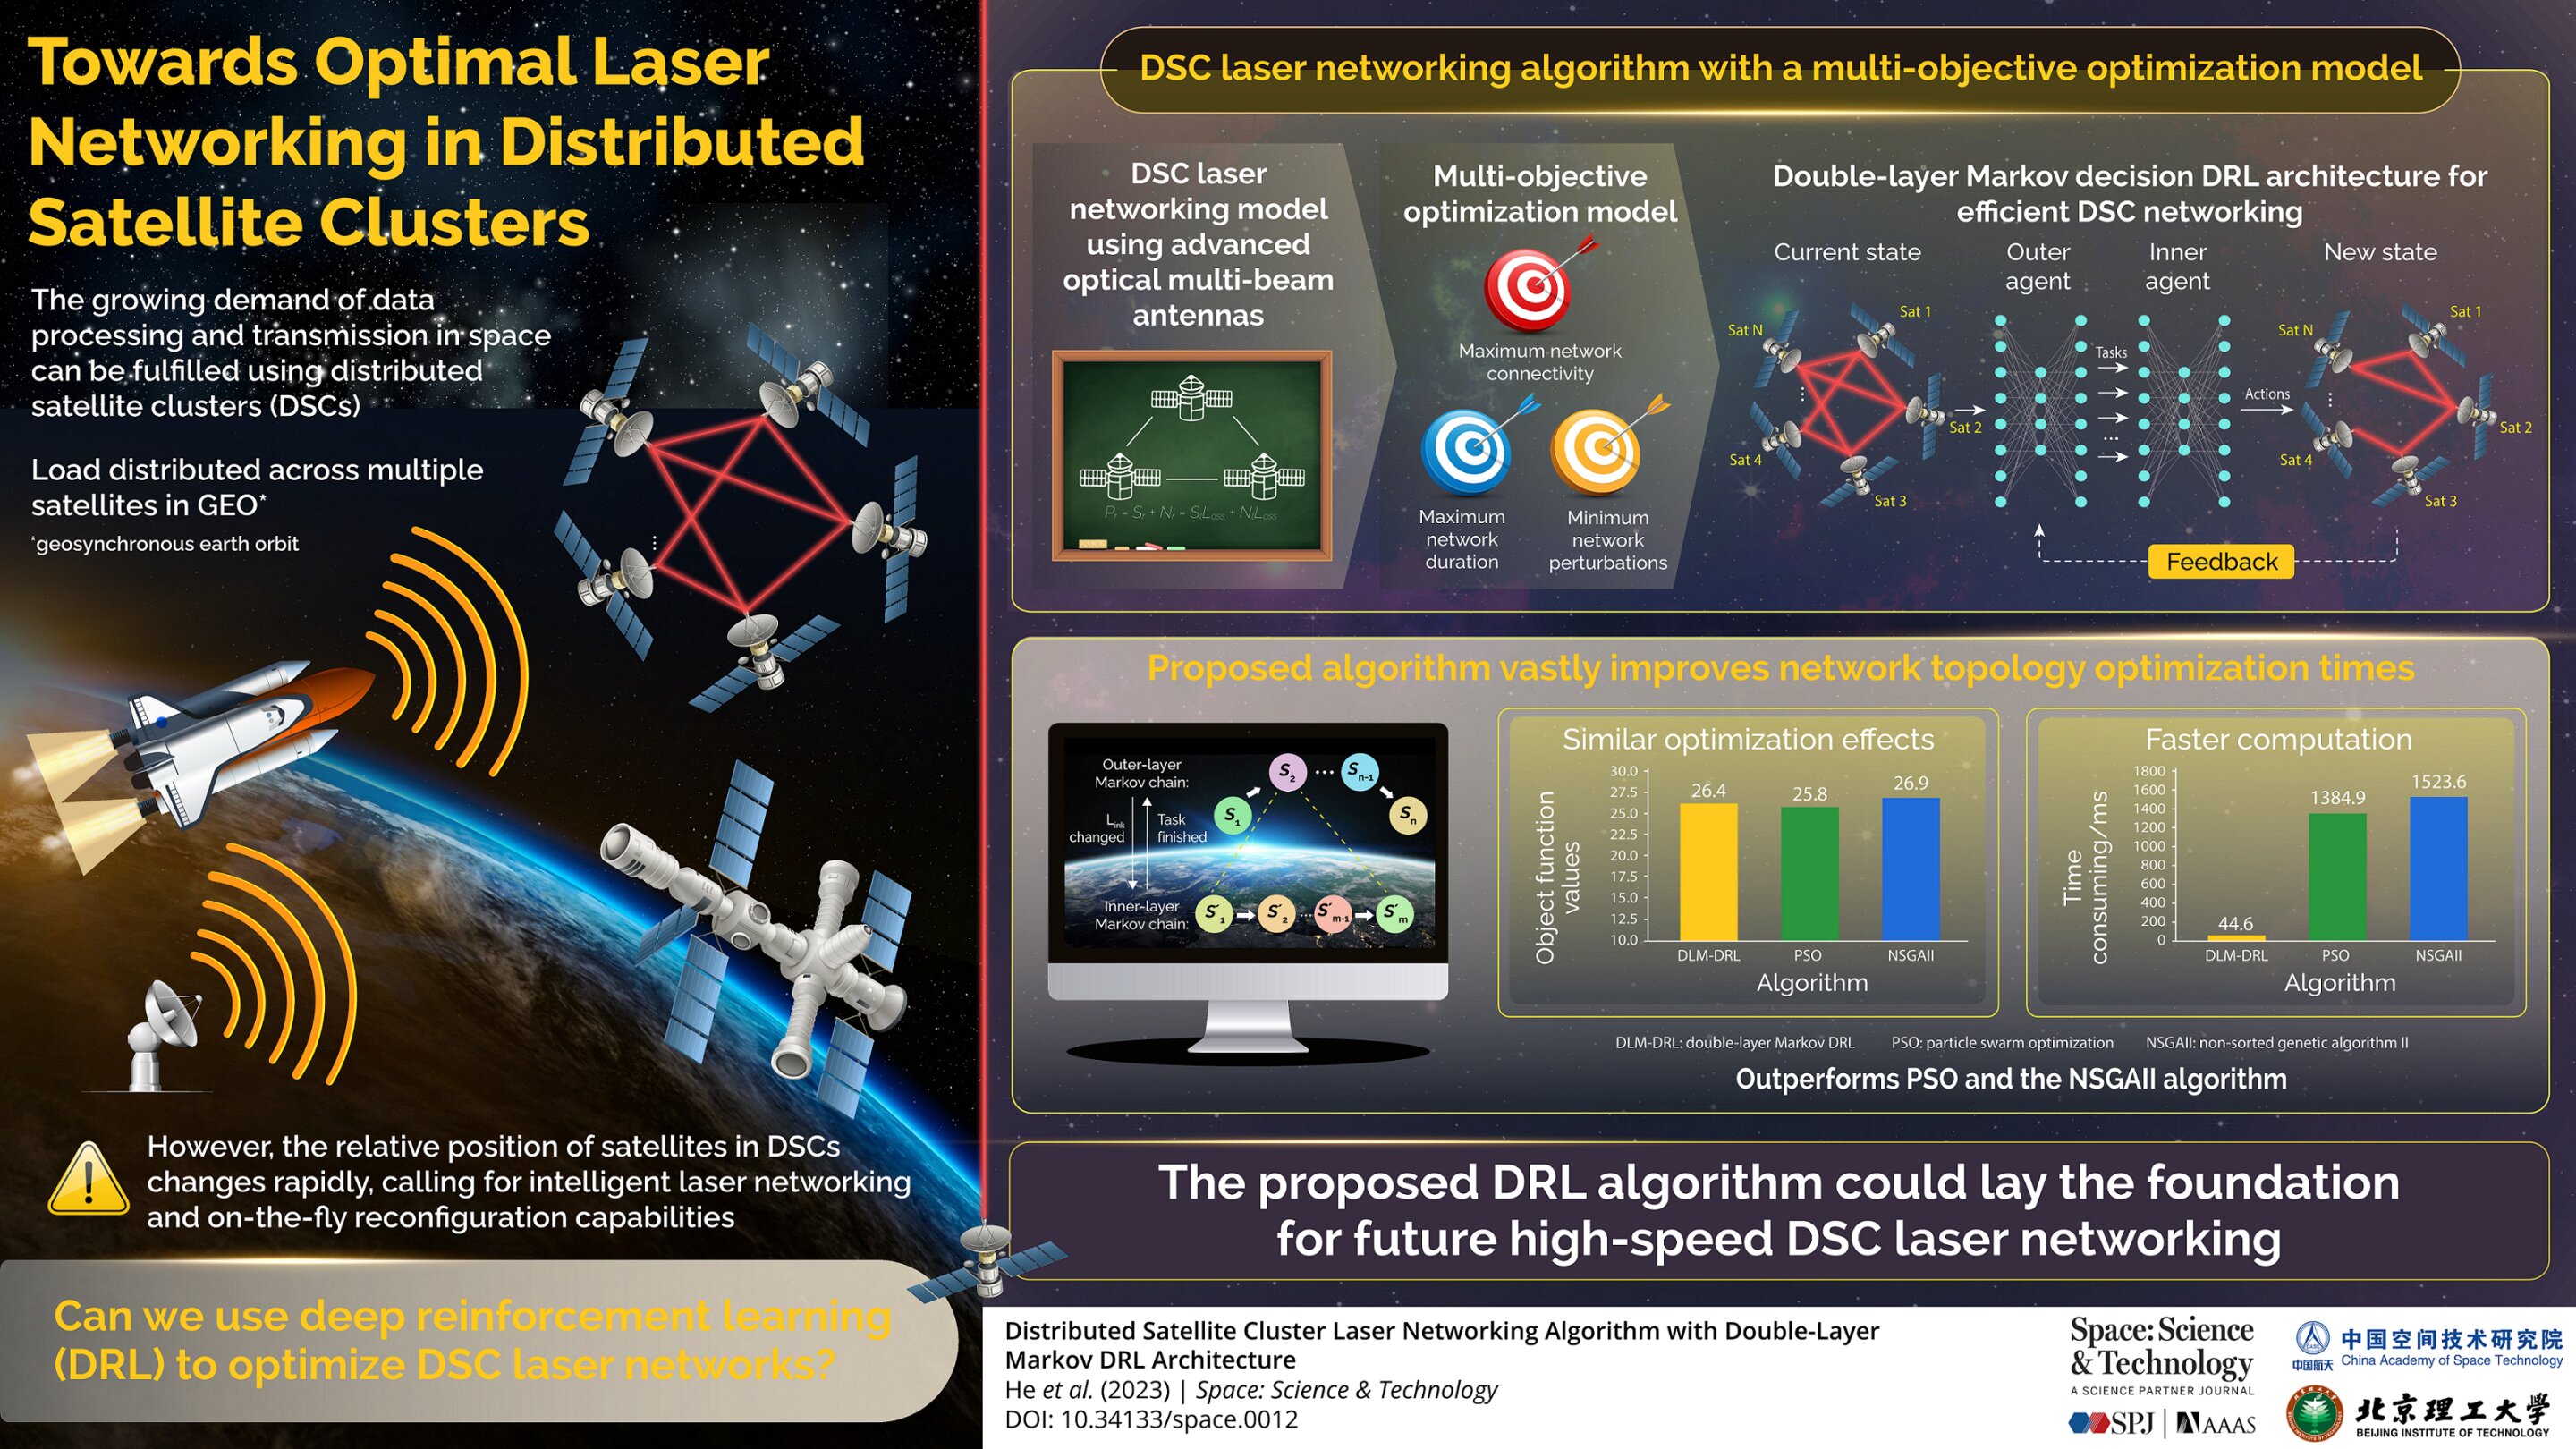 Scientists study distributed satellite cluster laser networking algorithm with double-layer Markov DRL architecture